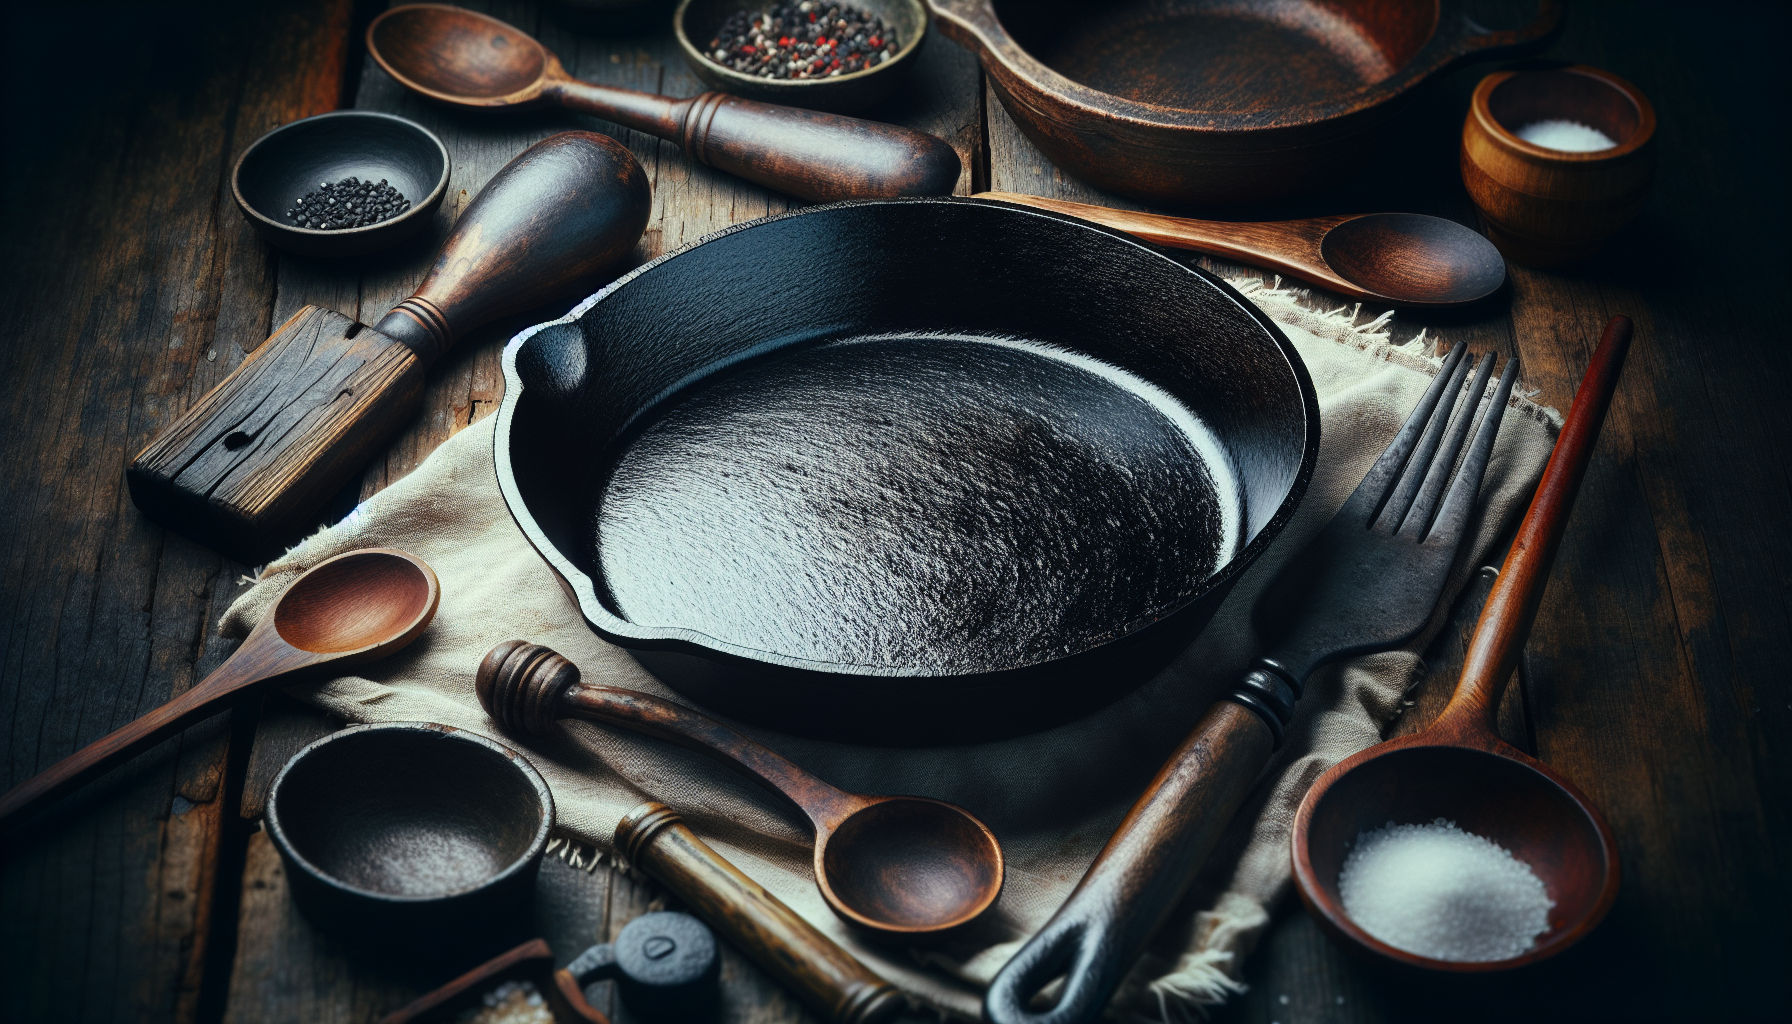 How long does a cast iron skillet last?